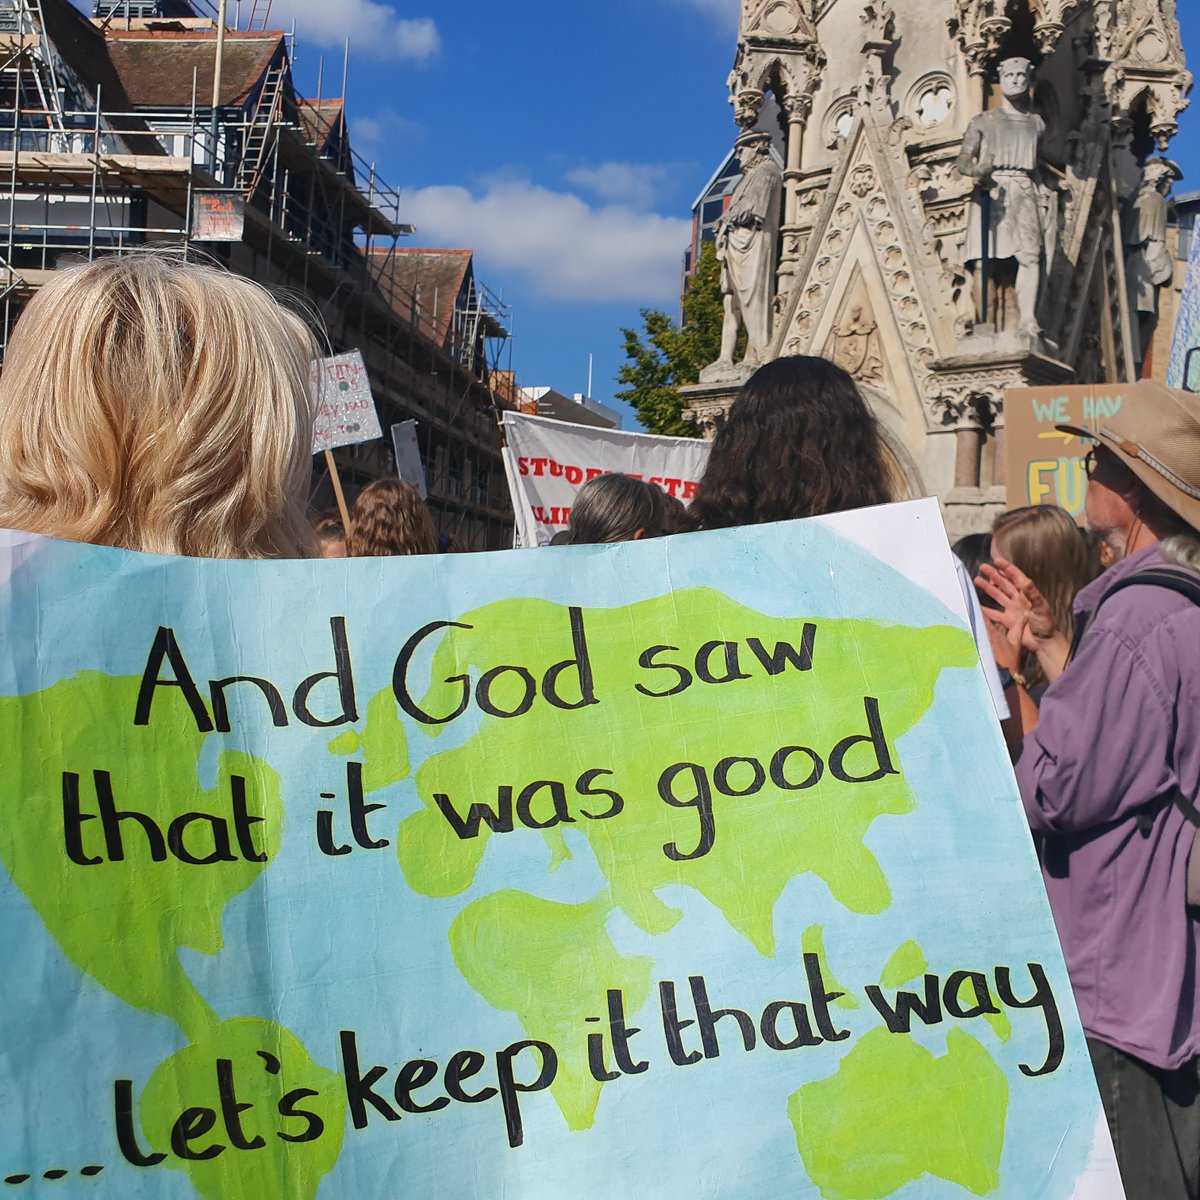 Today is #EarthDay, so here is a throwback to the time some of the congregation joined a climate march in Leicester city centre. Why not take a moment to give thanks for something good in creation, and commit to care for it?